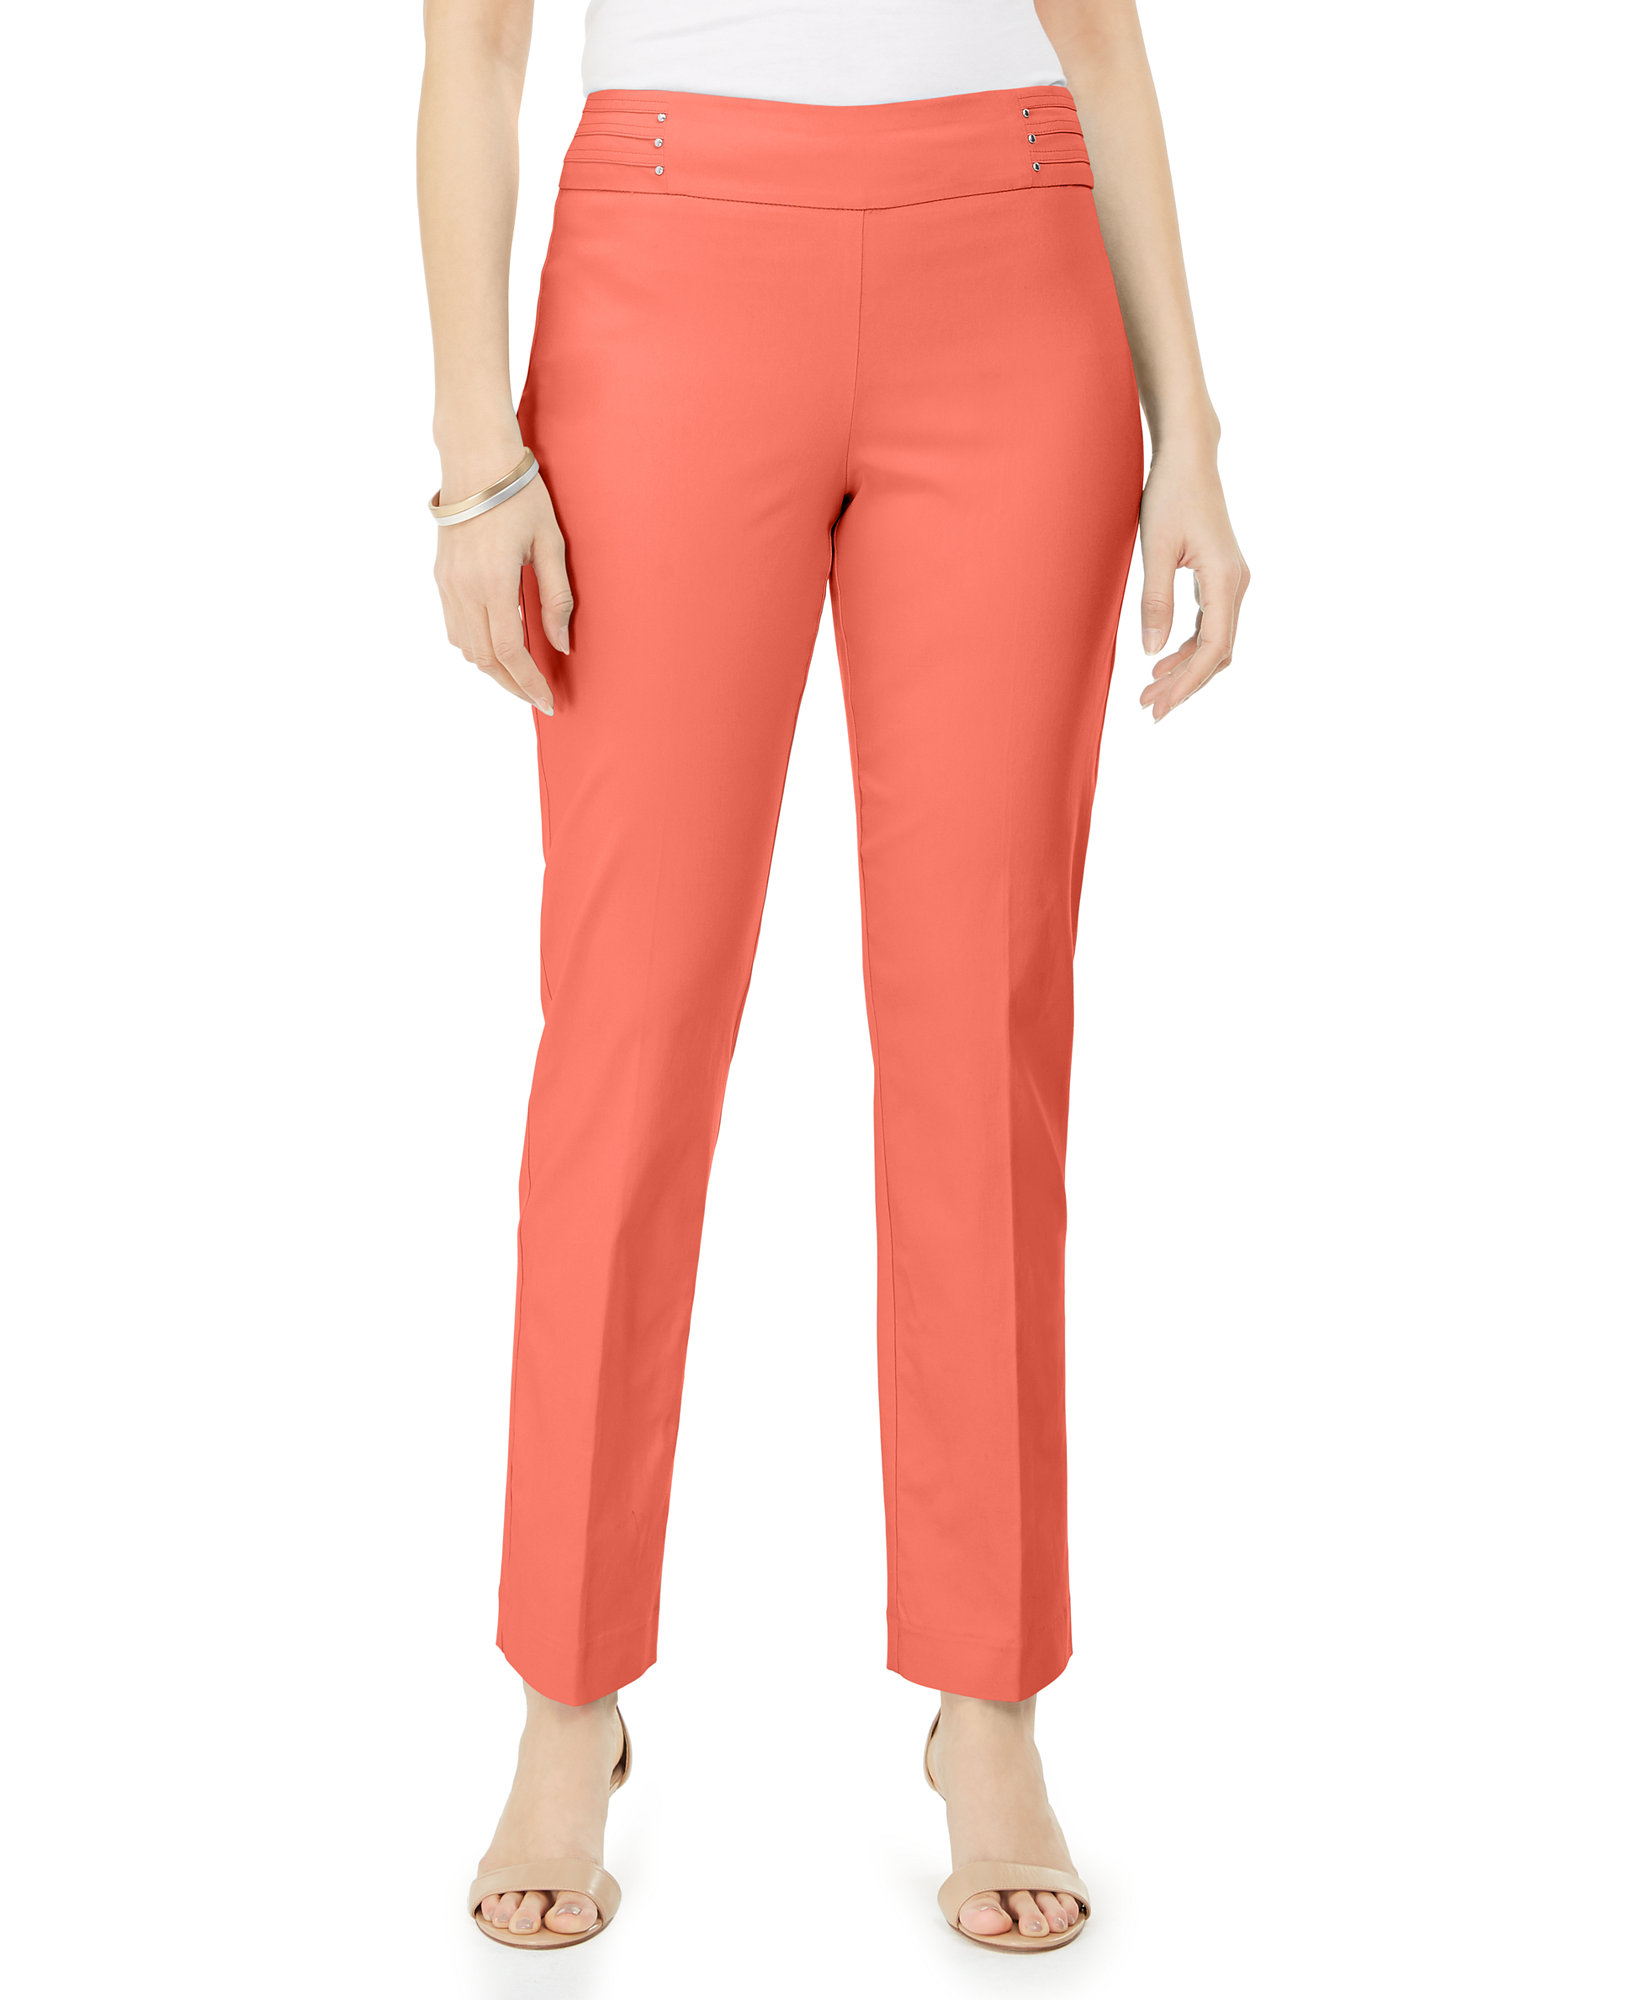 JM Collection Women's Studded Pull-On Tummy Control Pants (X-Large, Coral  Banks)